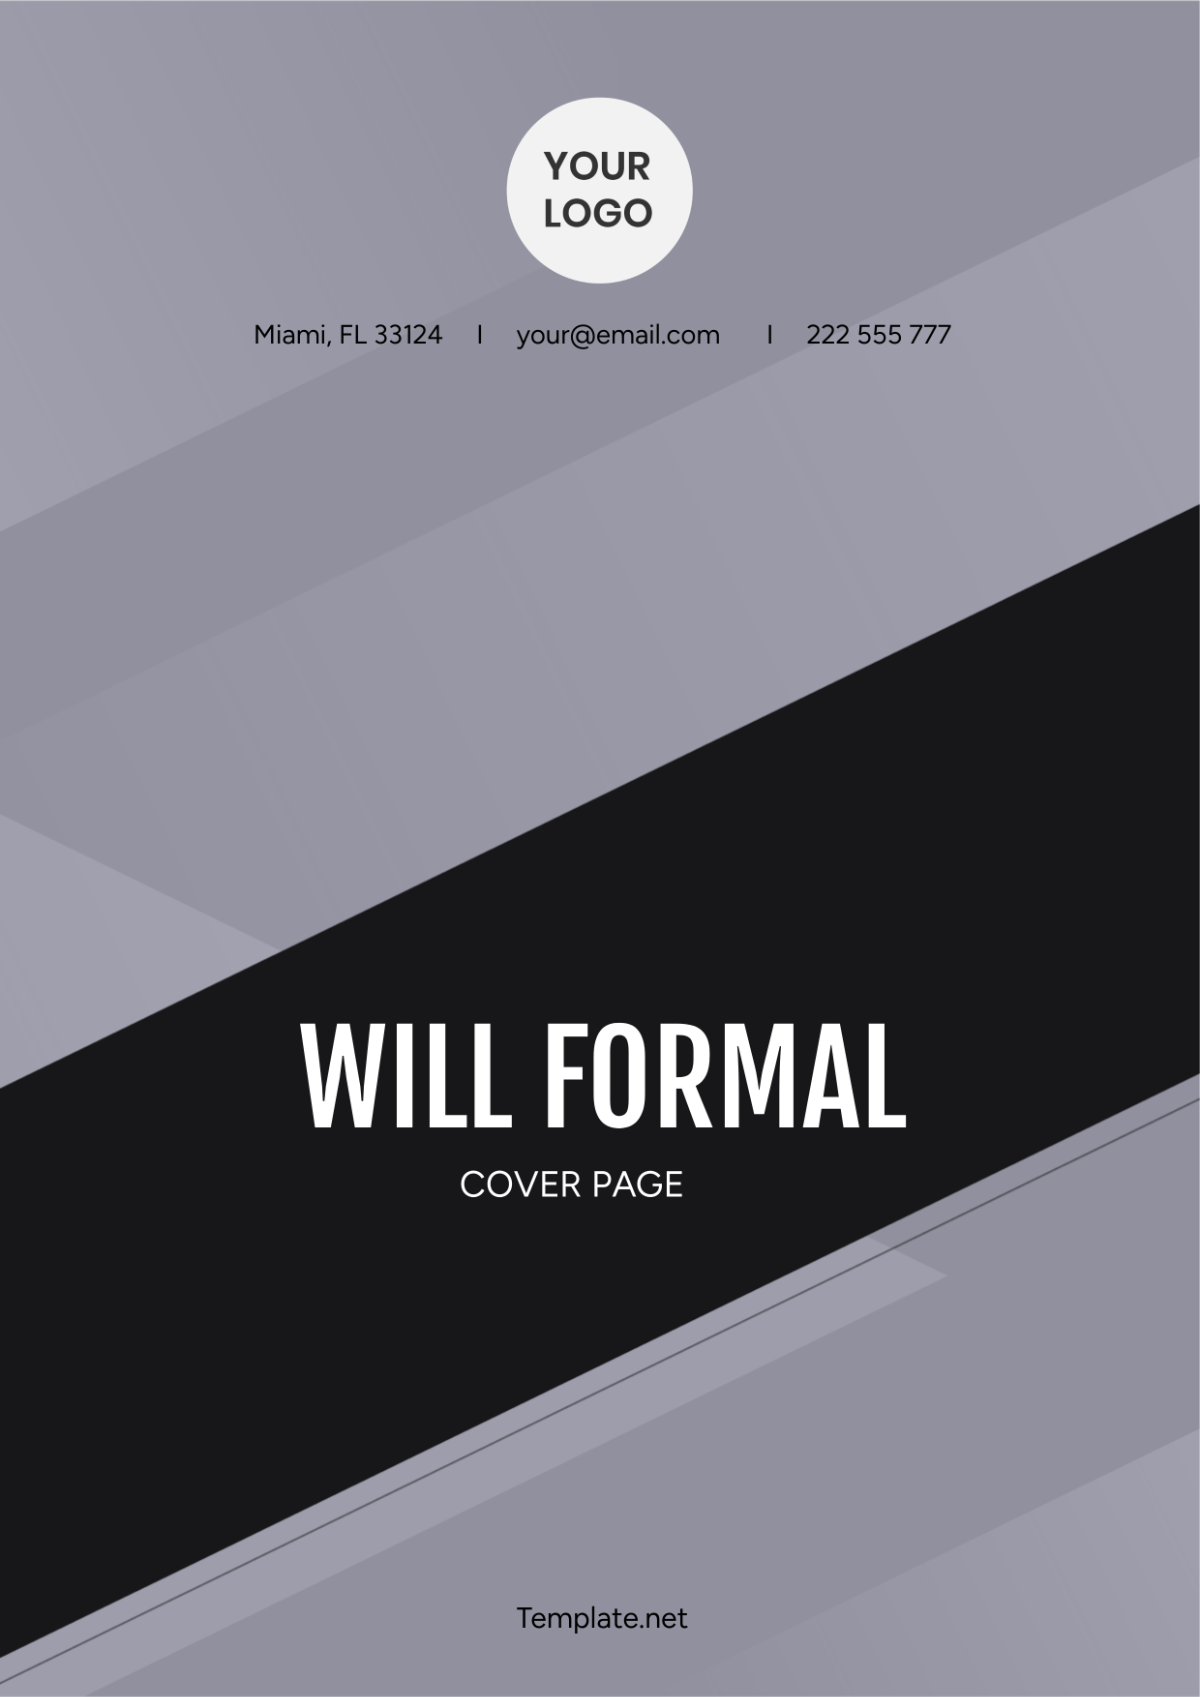 Will Formal Cover Page